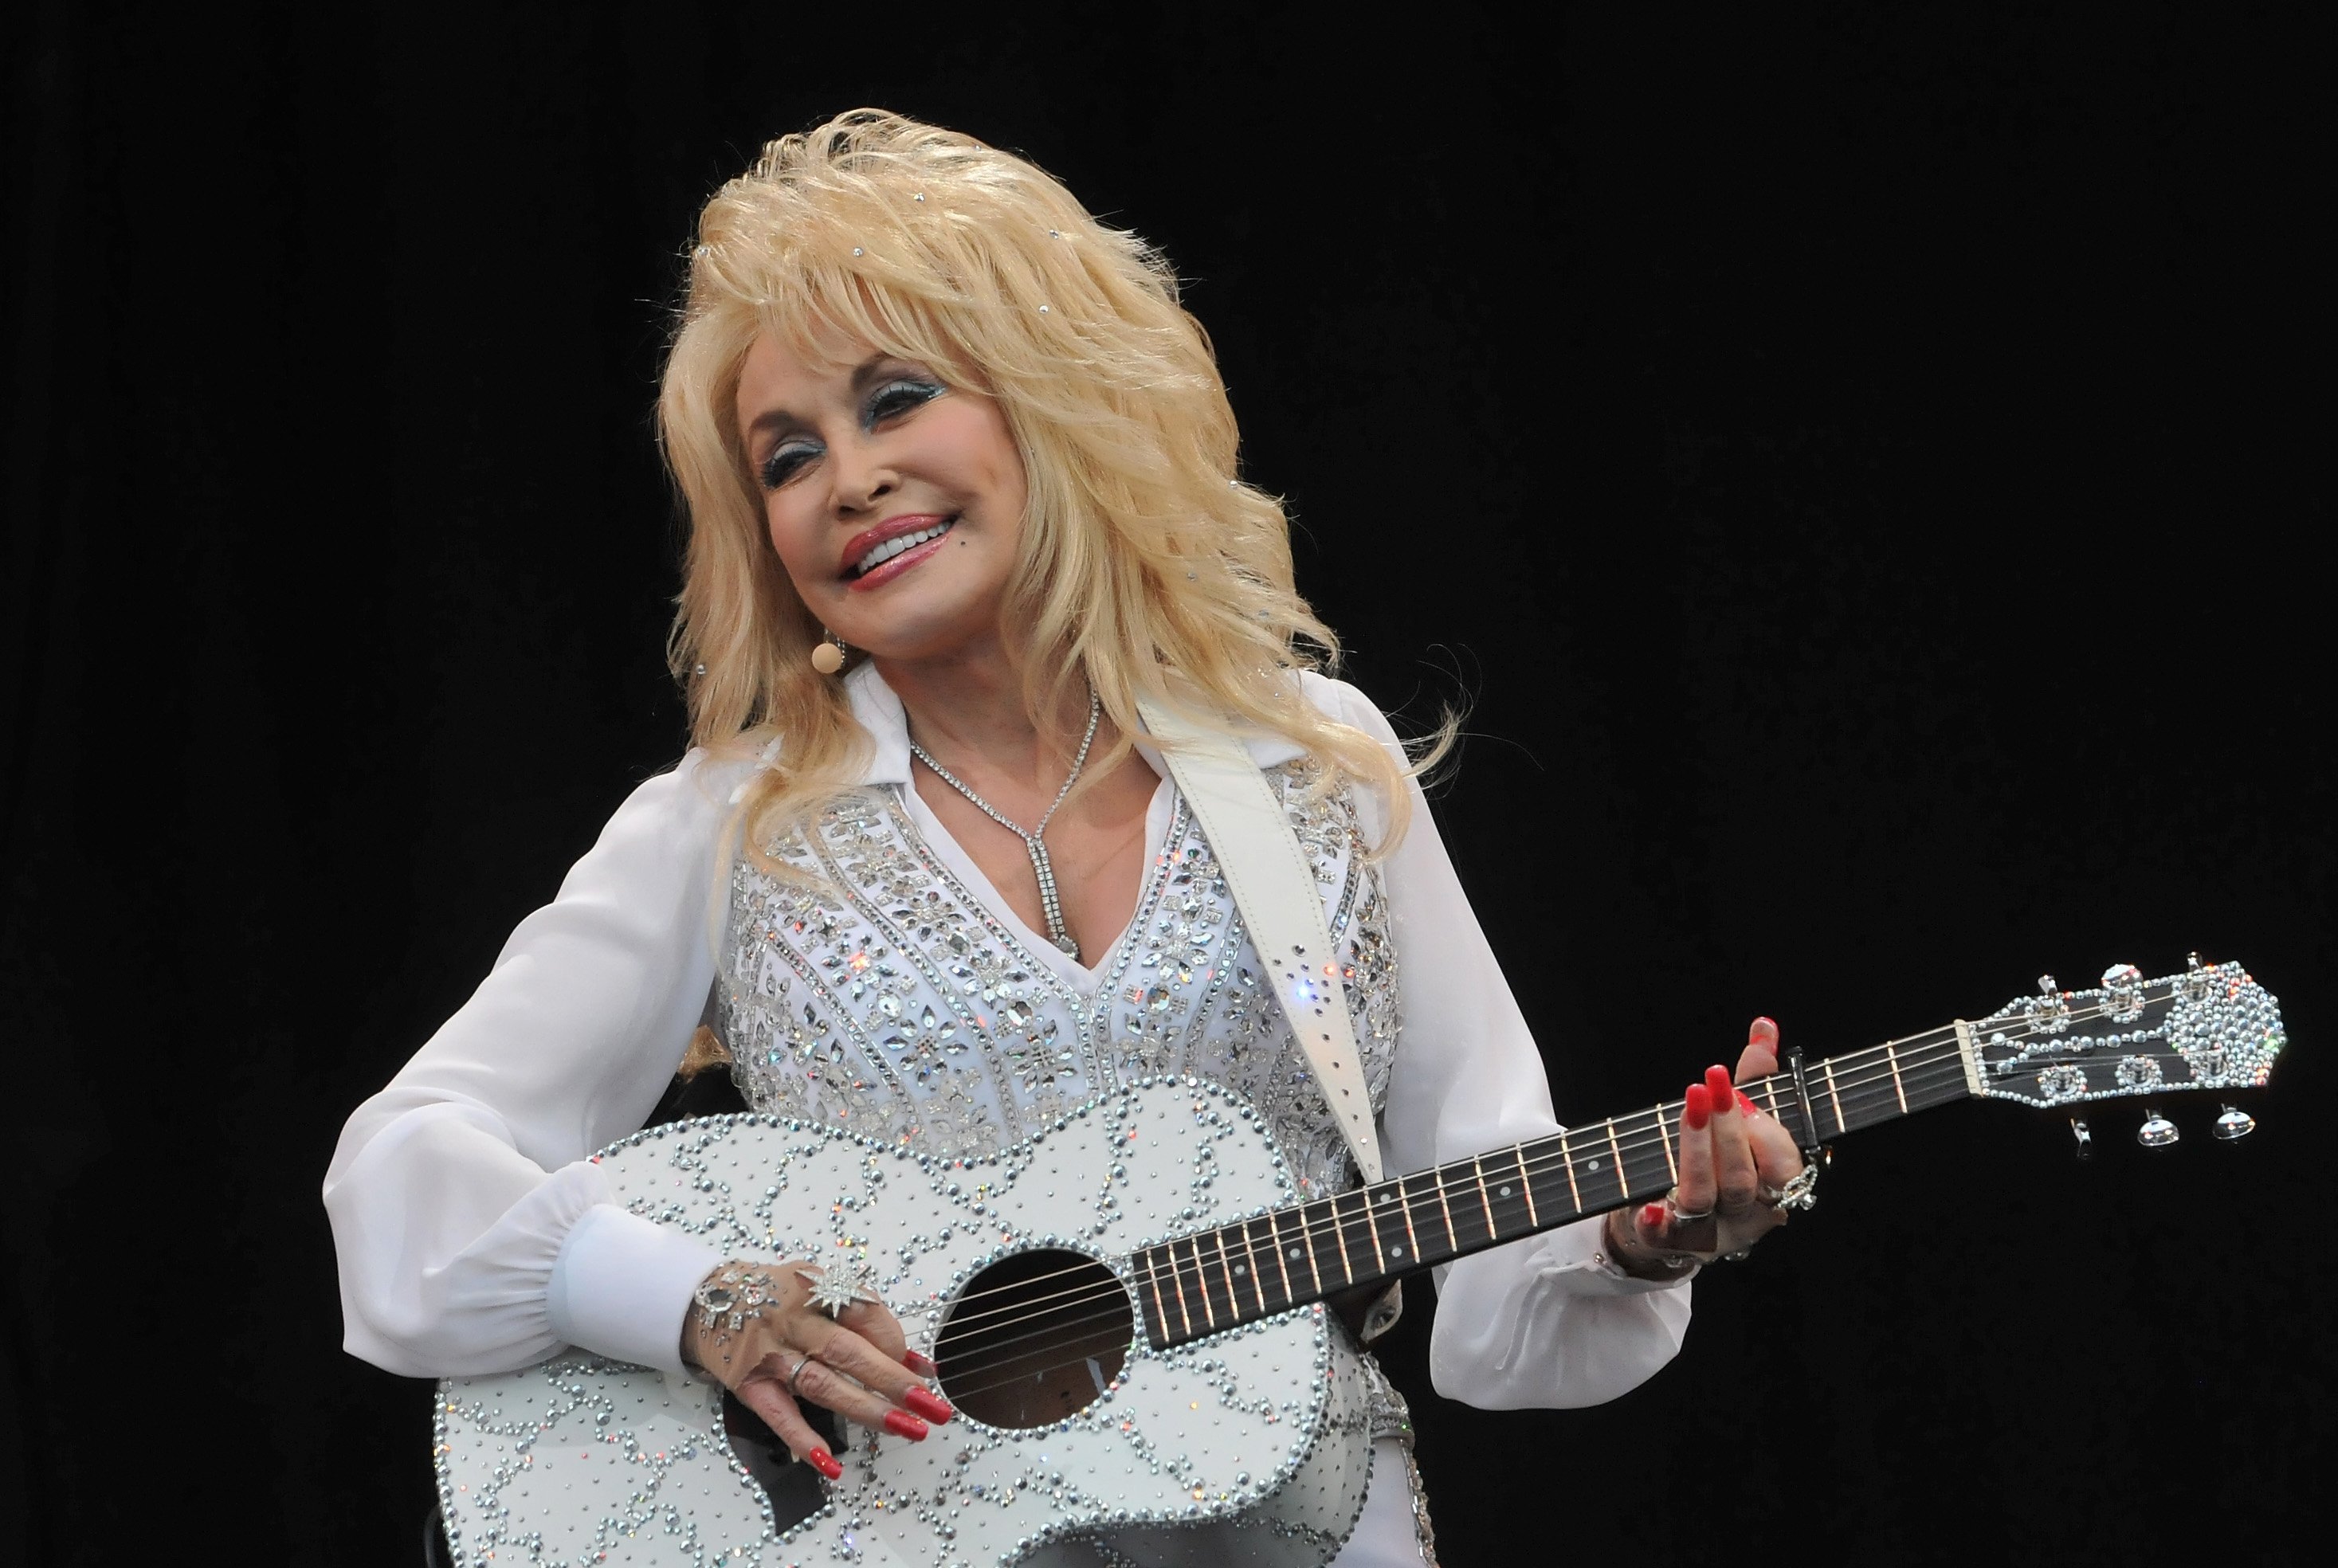 Dolly Parton performs at Glastonbury Festival in 2014